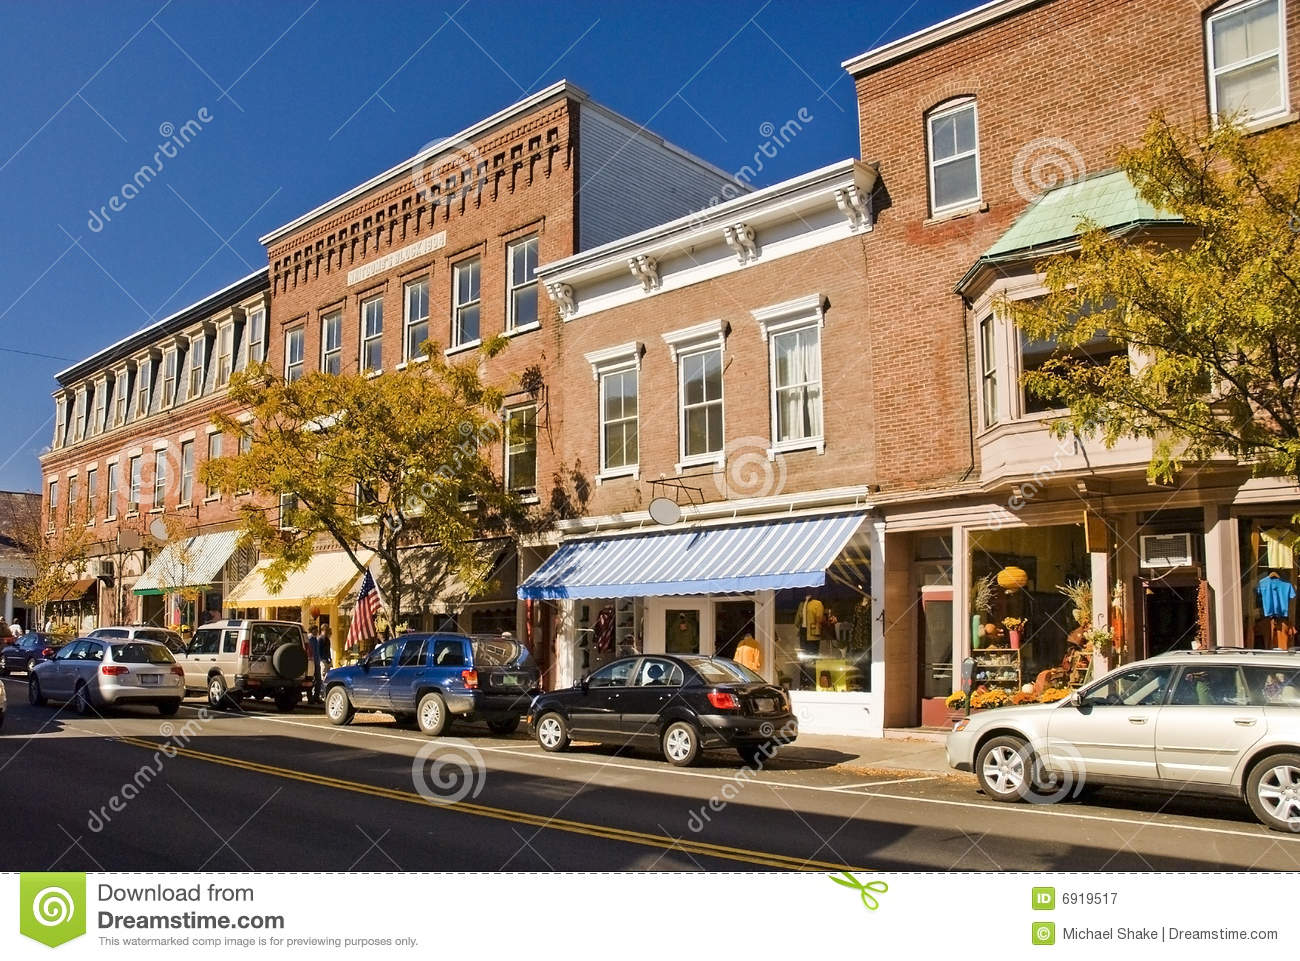 Typical New England Or Midwest Downtown Main Street  This Street Scene    